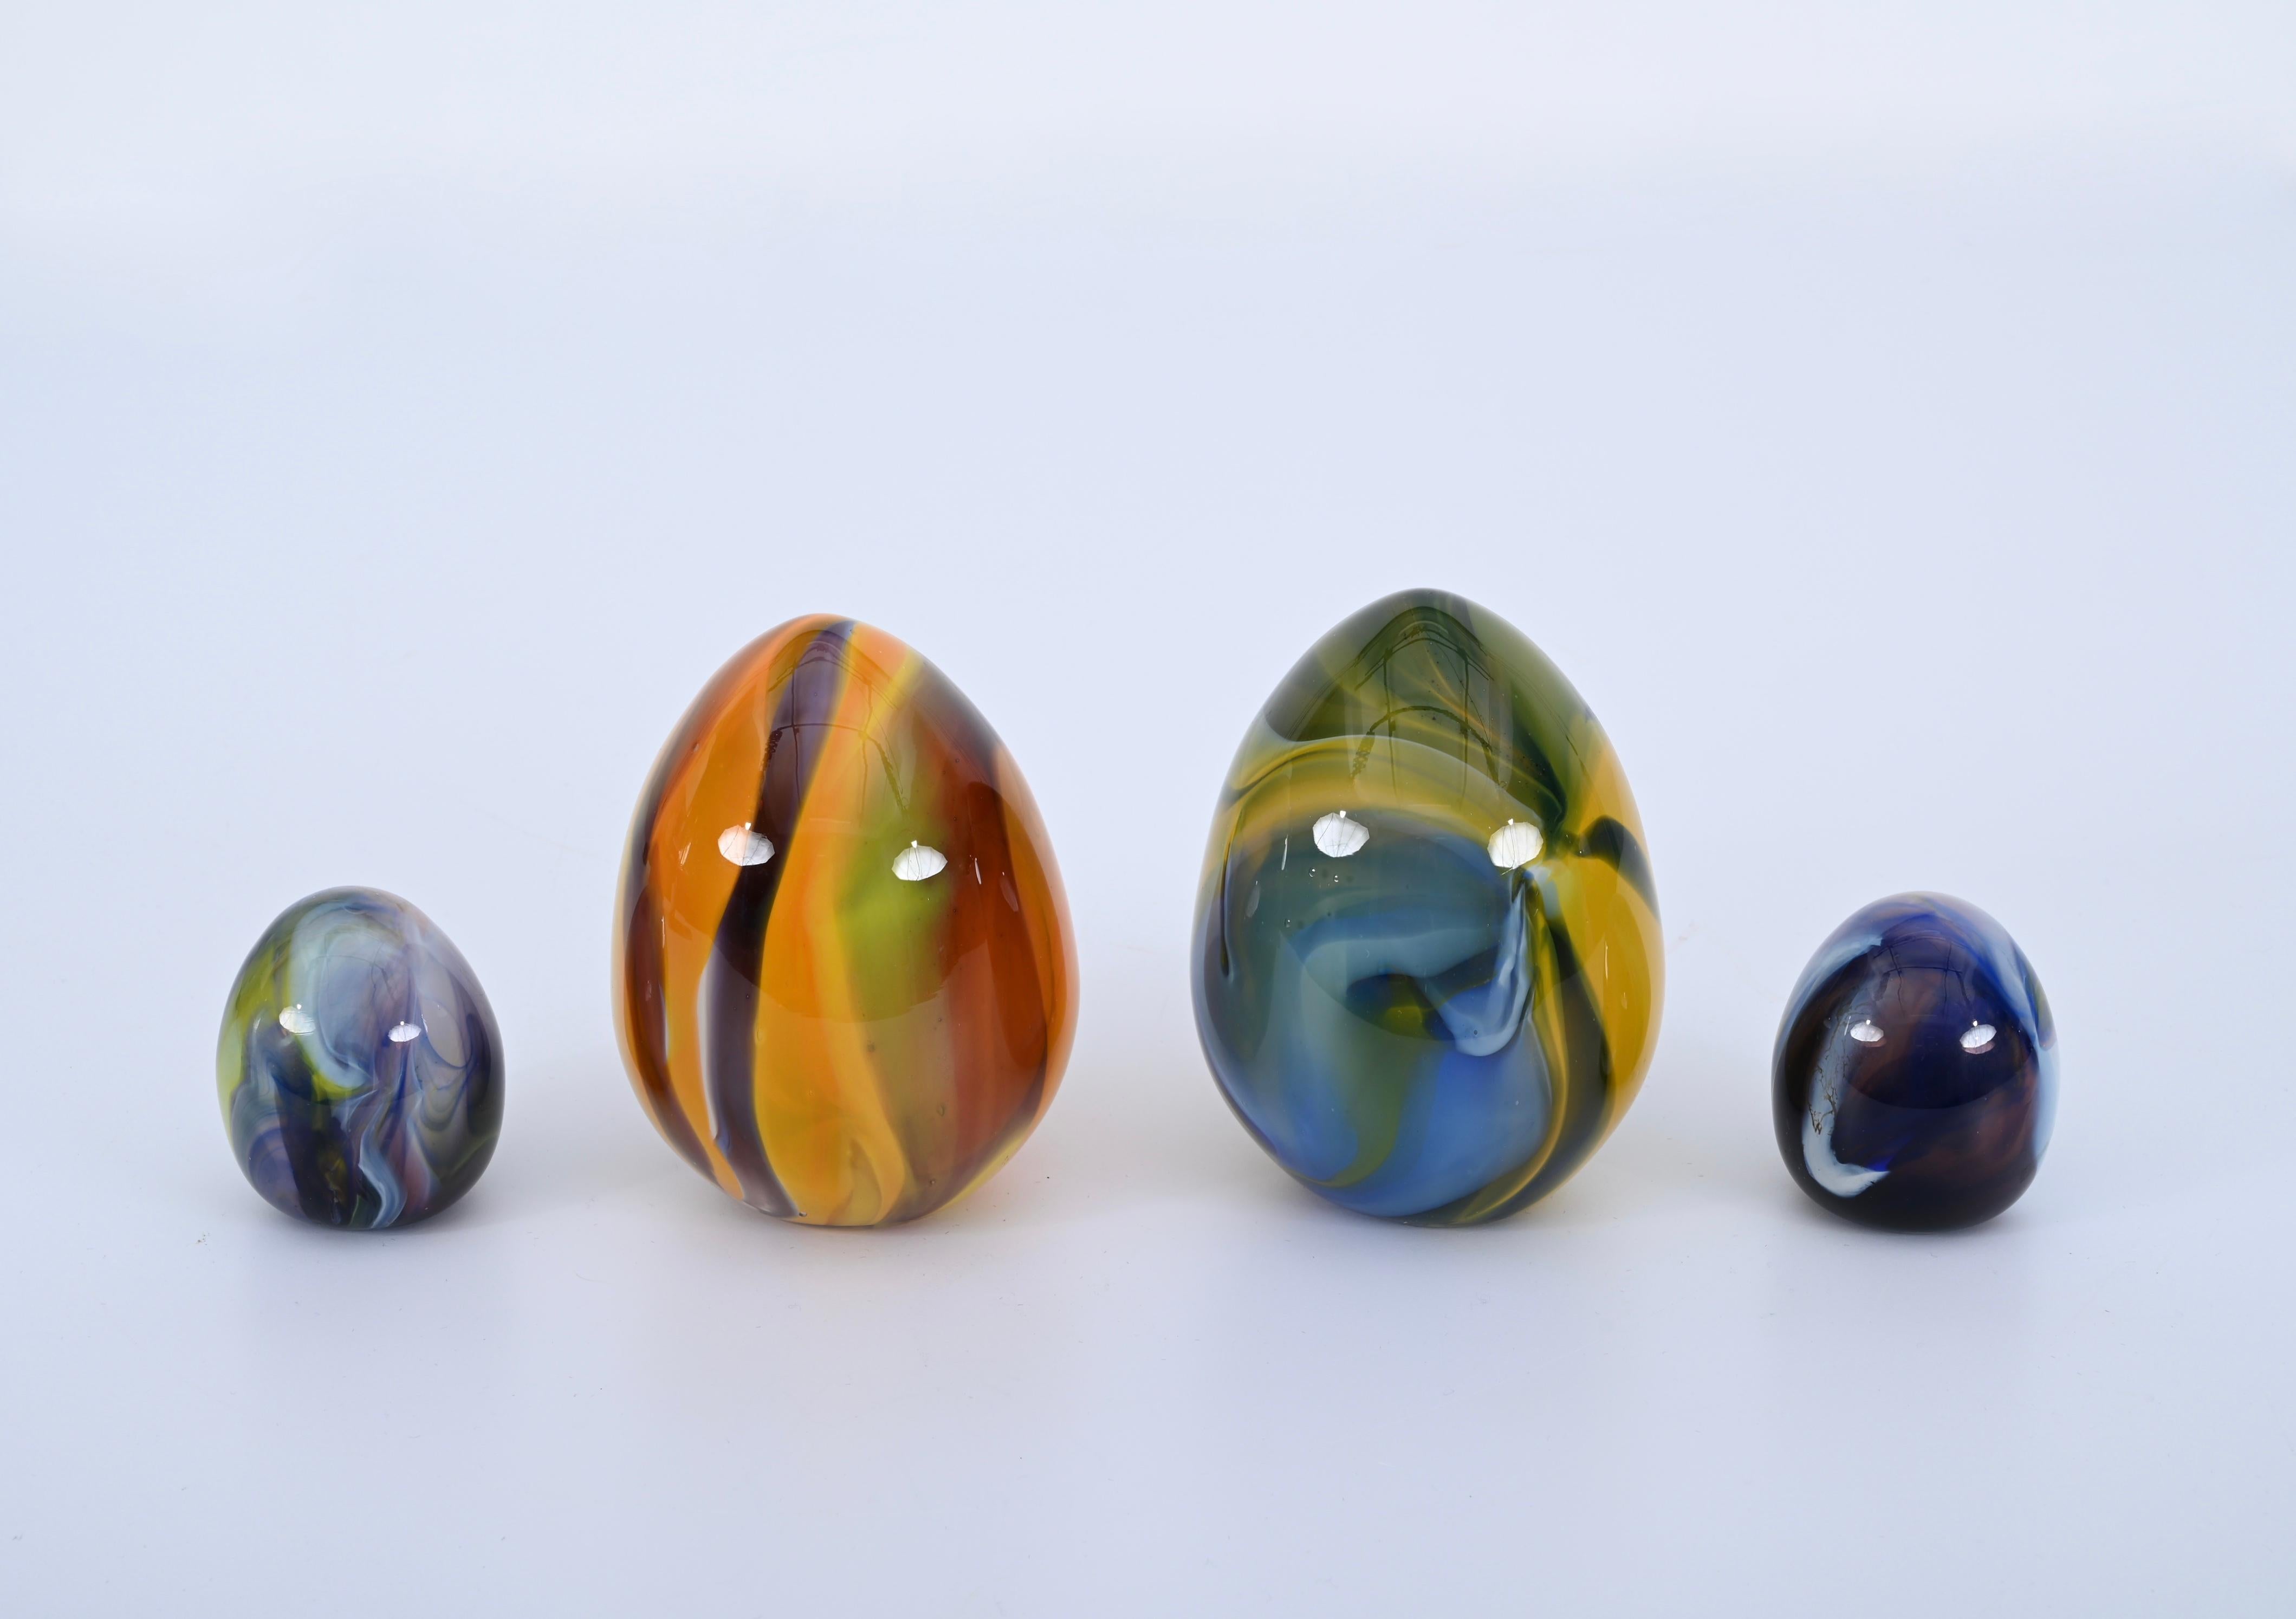 Italian Set of Murano Hand-Blown Colored Glass Eggs, by Archimede Seguso, Italy, 1970s For Sale